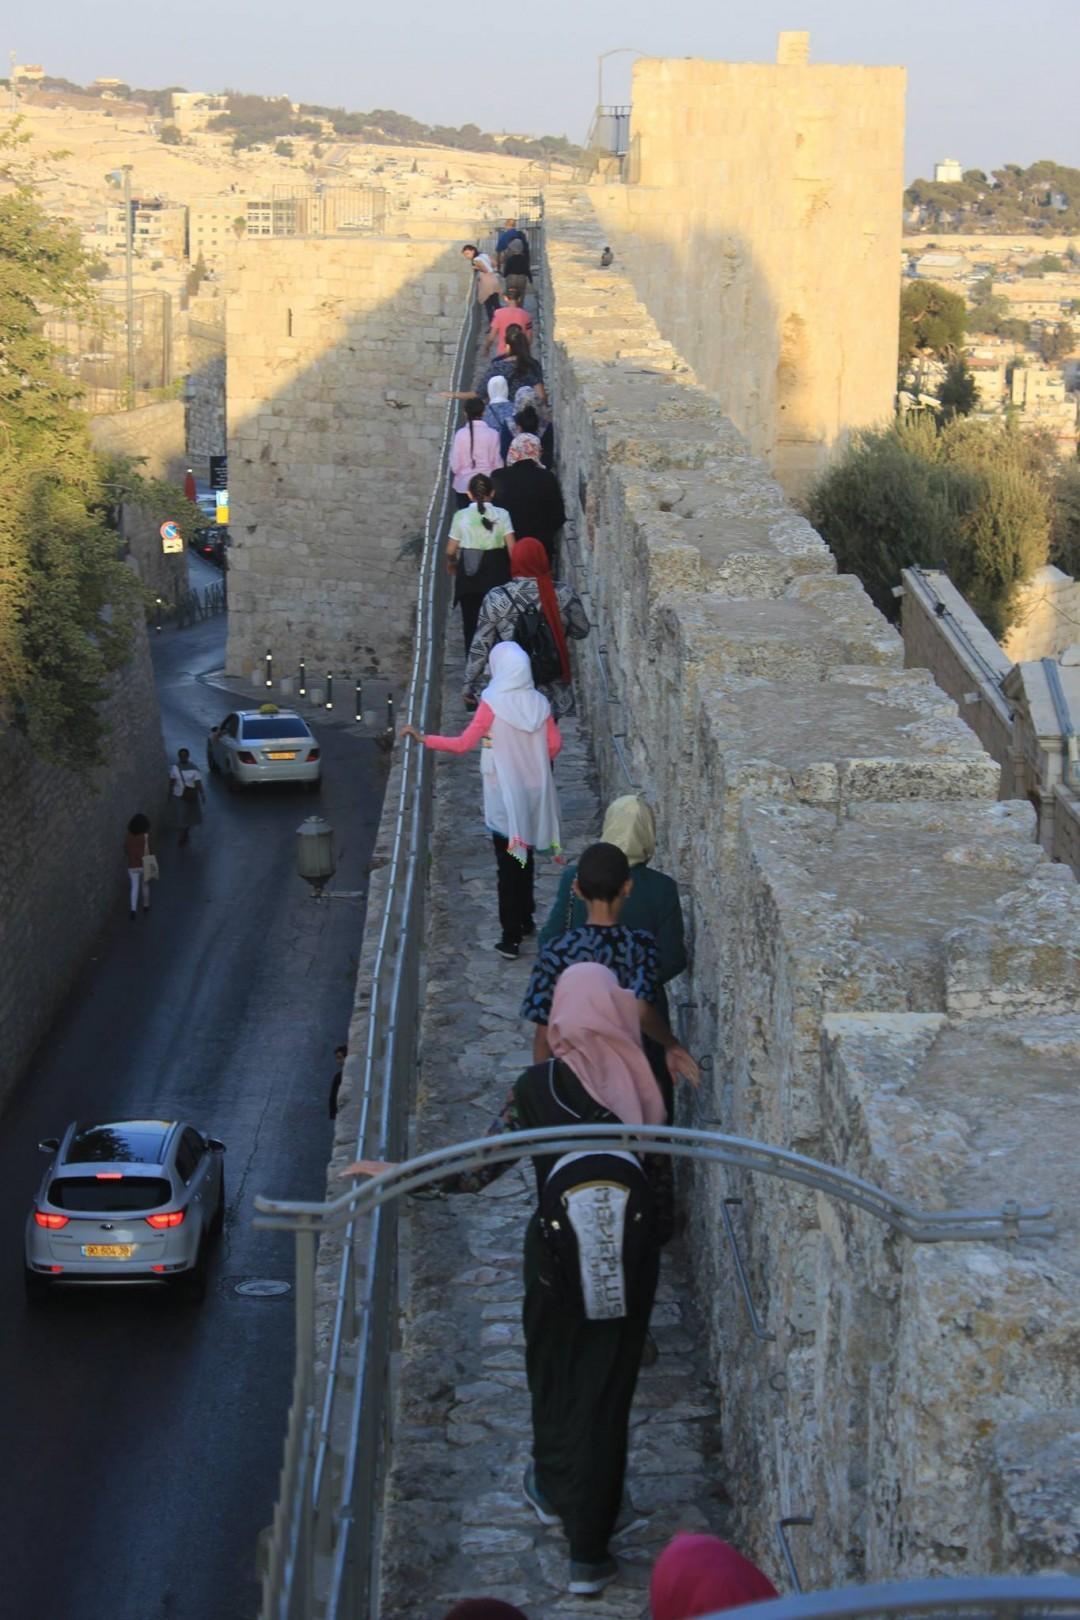 Historical and Religious Tours for Palestinians of 1948